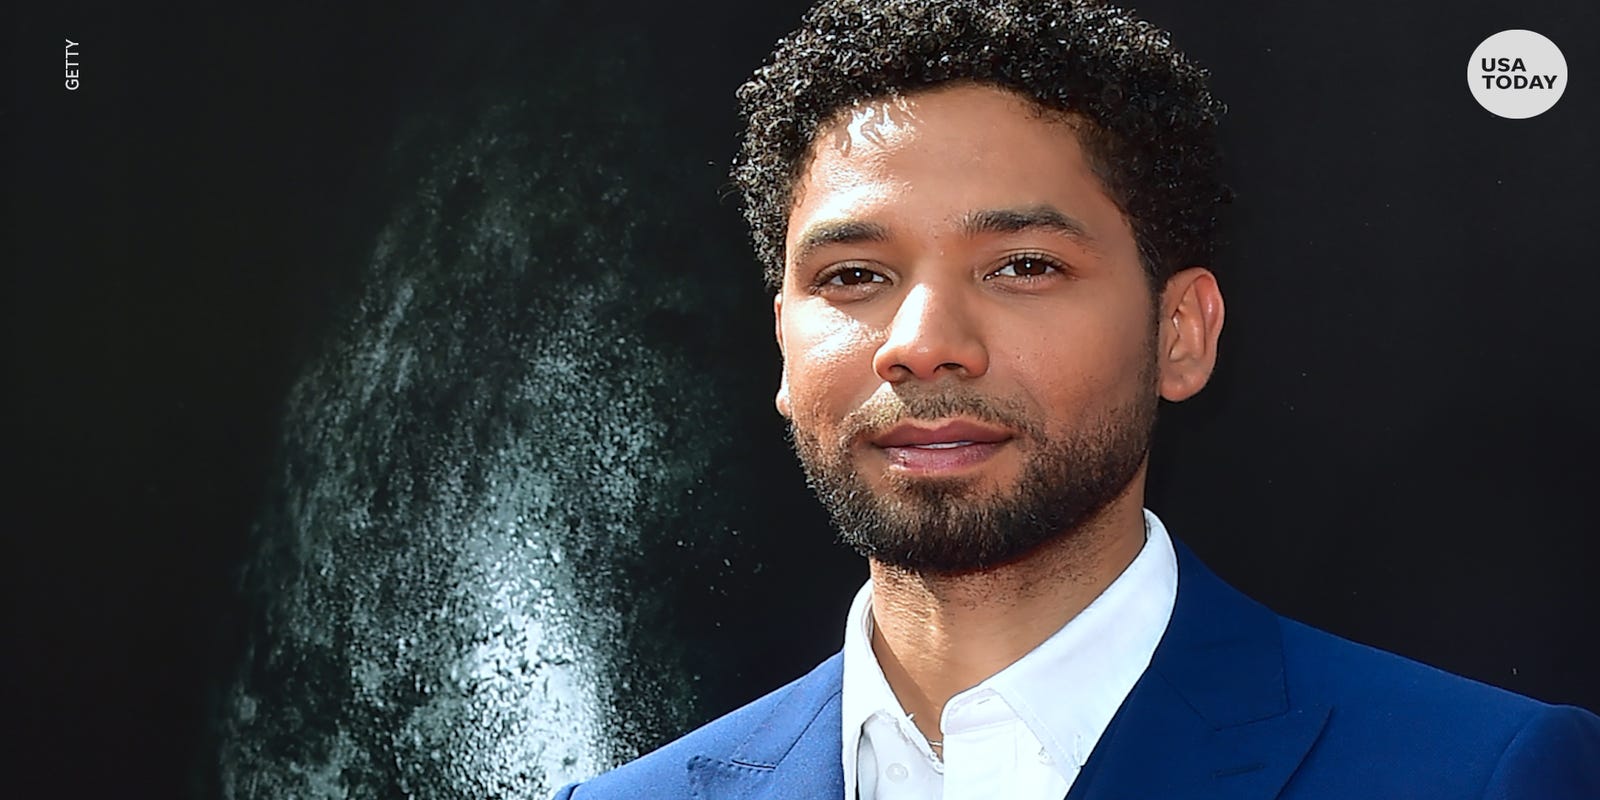 I enjoyed the Jussie Smollett verdict, but there are culture war lessons for both sides